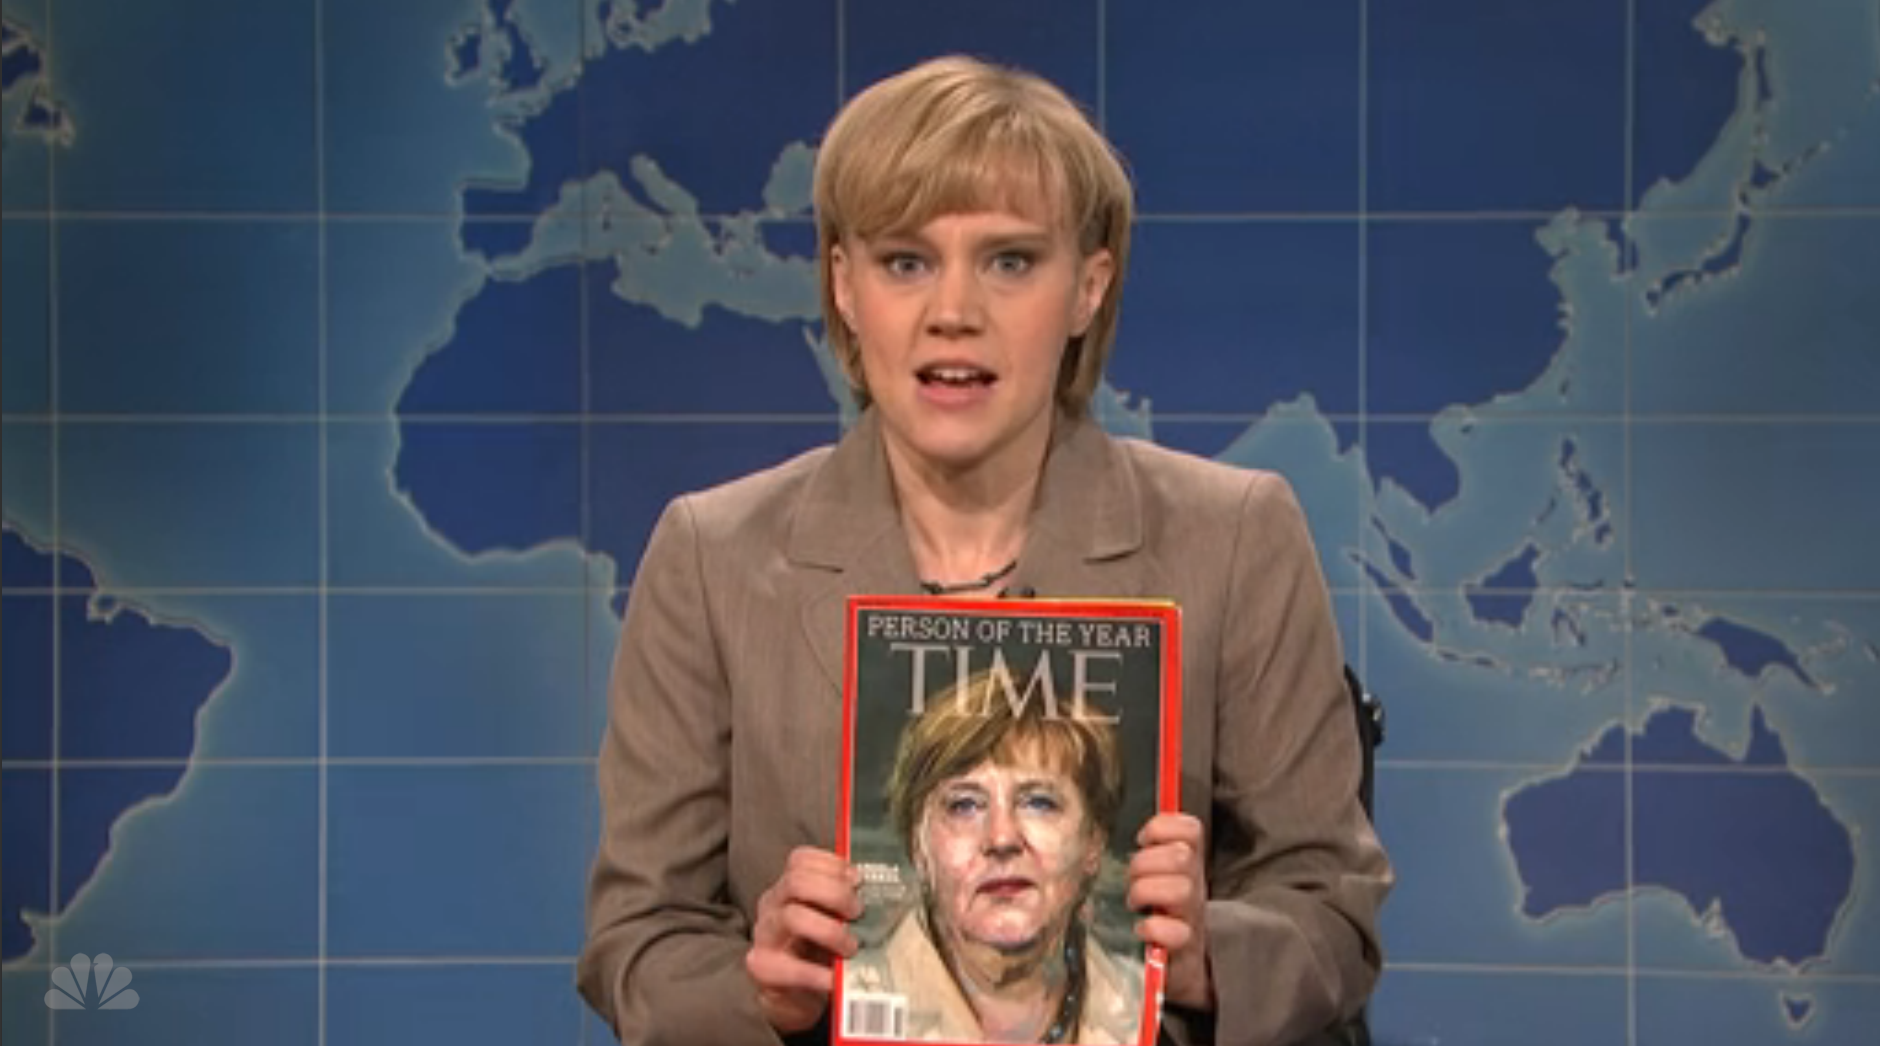 Saturday Night Live spoofed this week’s naming of Angela Merkel as TIME’s 2015 Person of the Year.